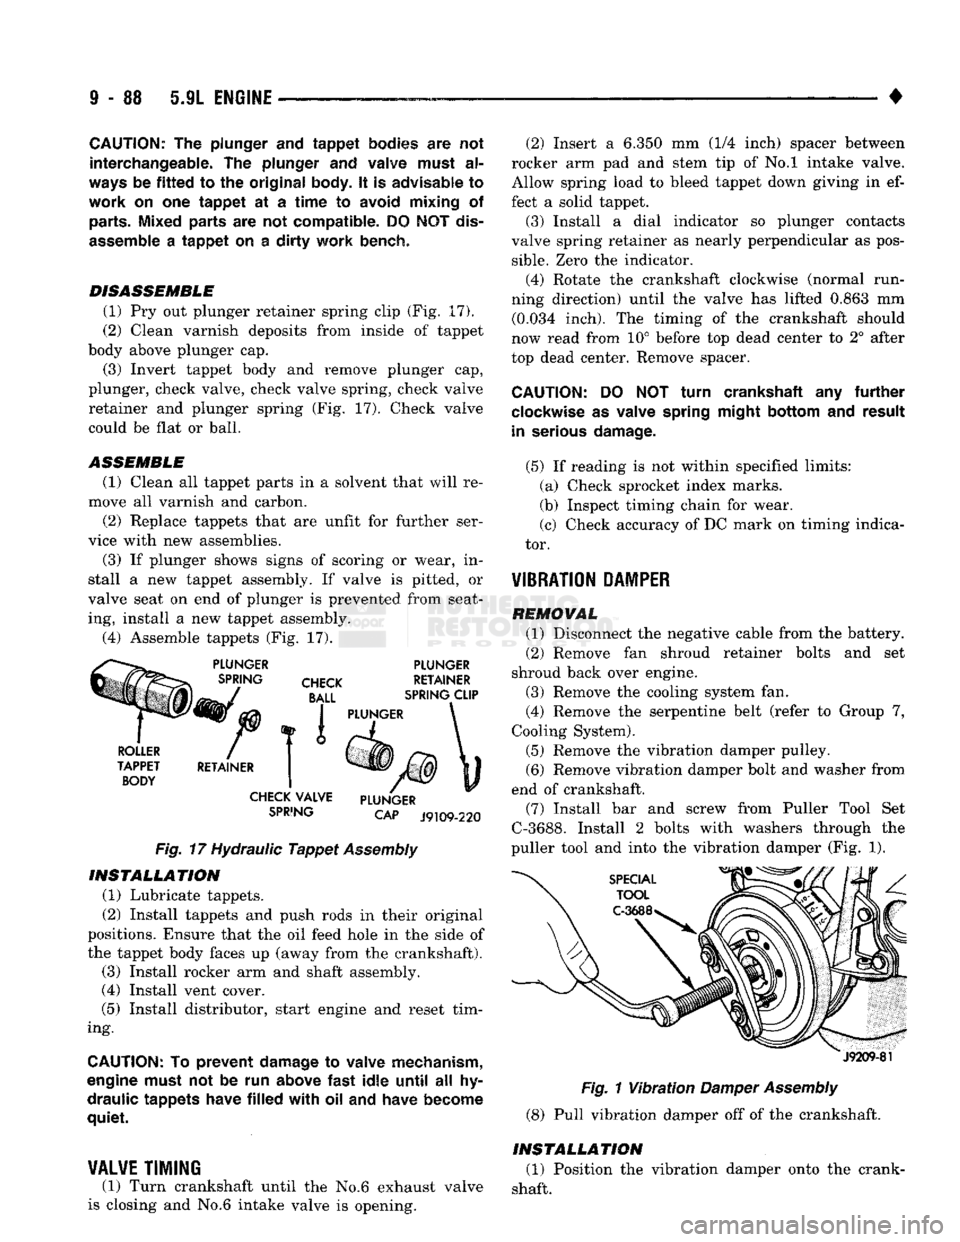 DODGE TRUCK 1993  Service Repair Manual 
9
 - 88 5.9L
 ENGINE 

• 
CAUTION:
 The
 plunger
 and
 tappet
 bodies
 are not 

interchangeable,.
 The
 plunger
 and
 valve must
 al­

ways
 be
 fitted
 to the
 original
 body,
 It is
 advisable
